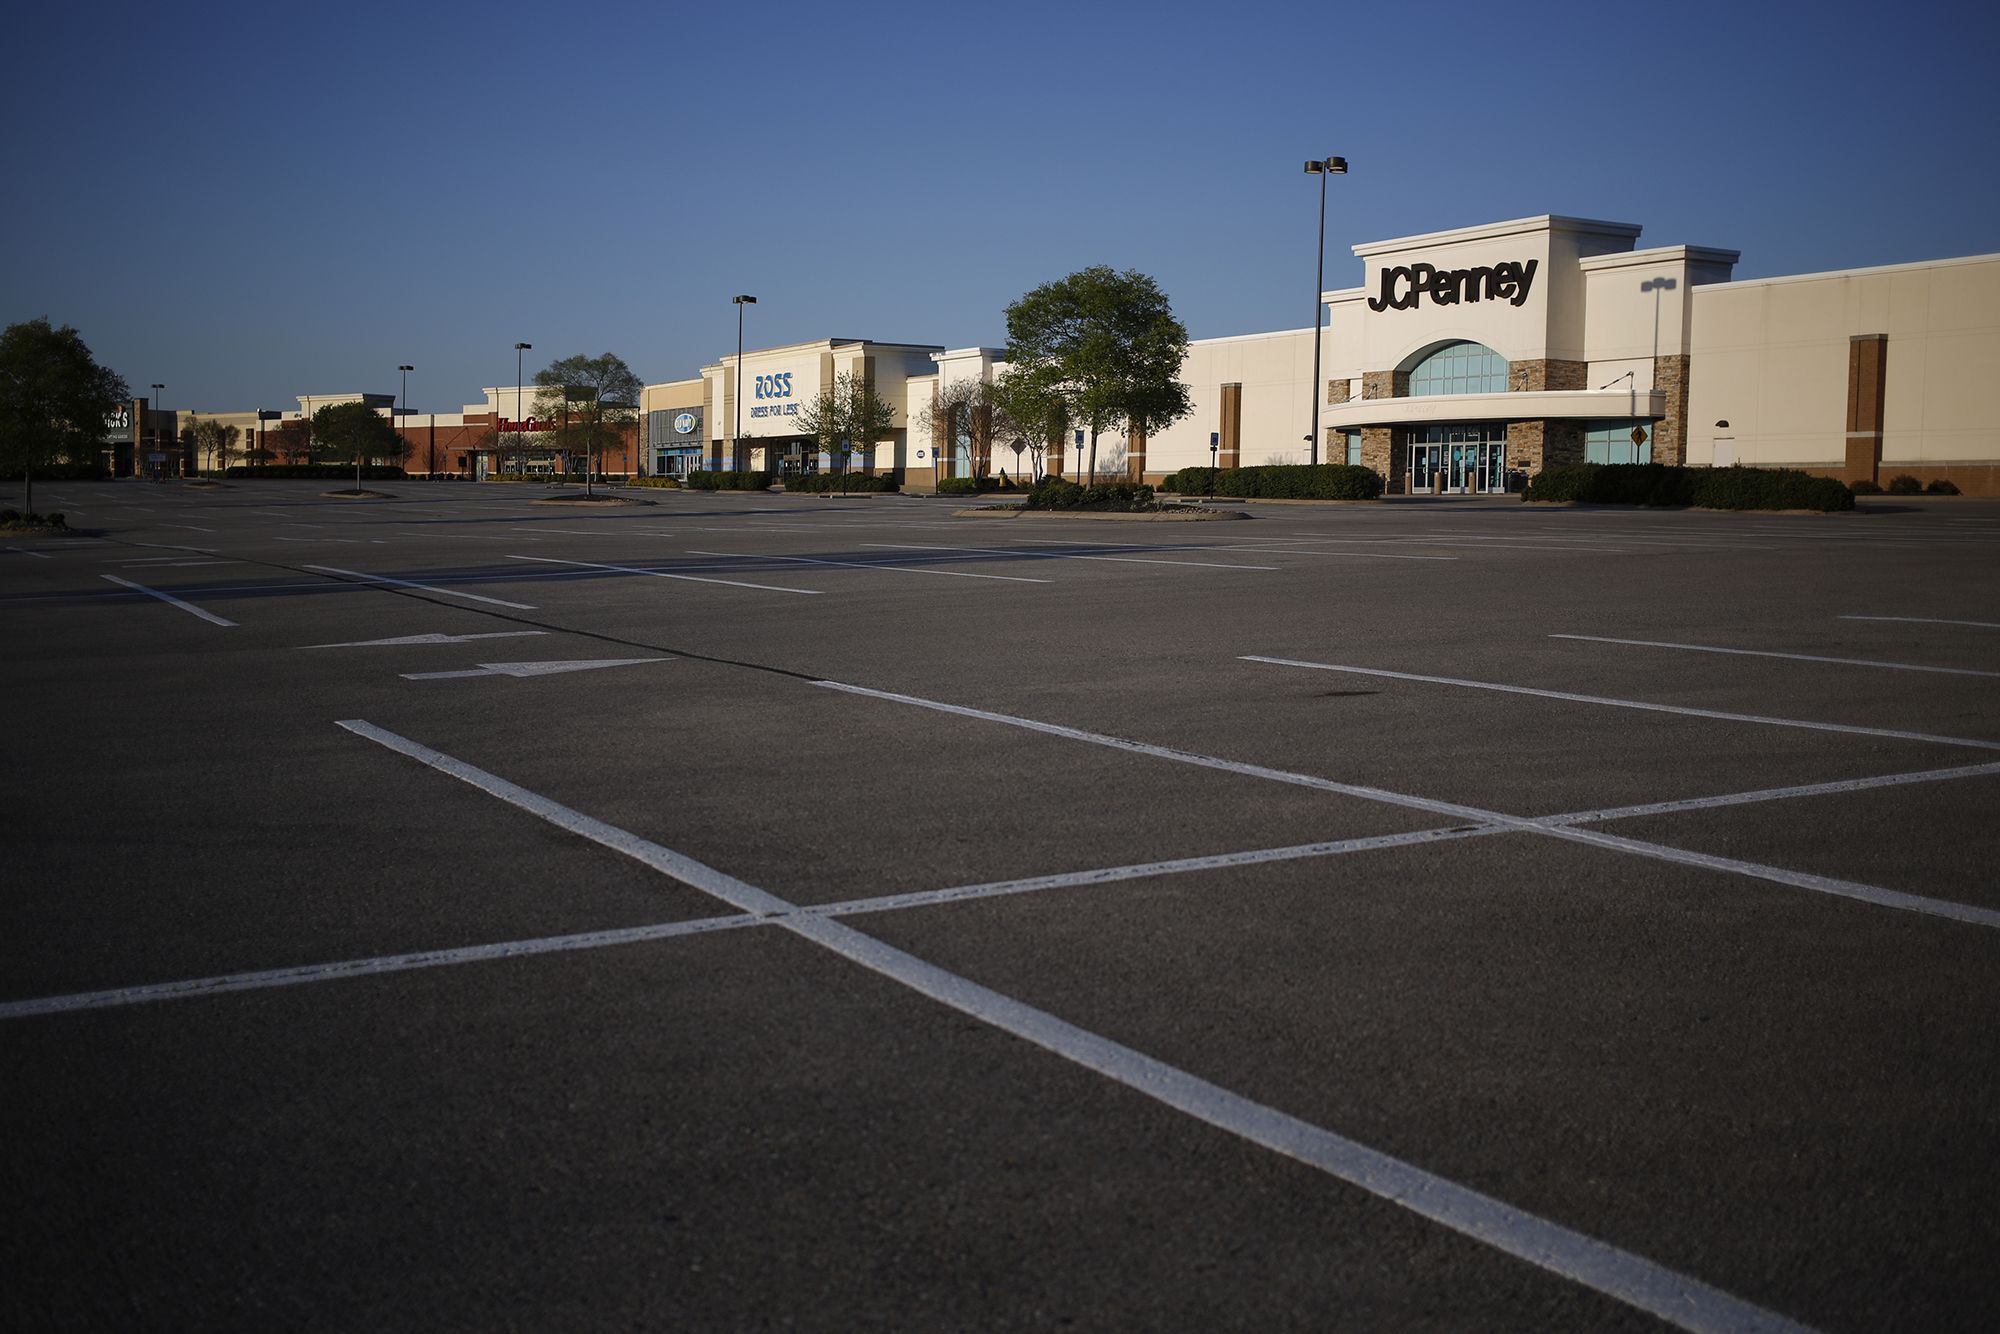 J. C. Penney Reports as a Retail Mall Survivor